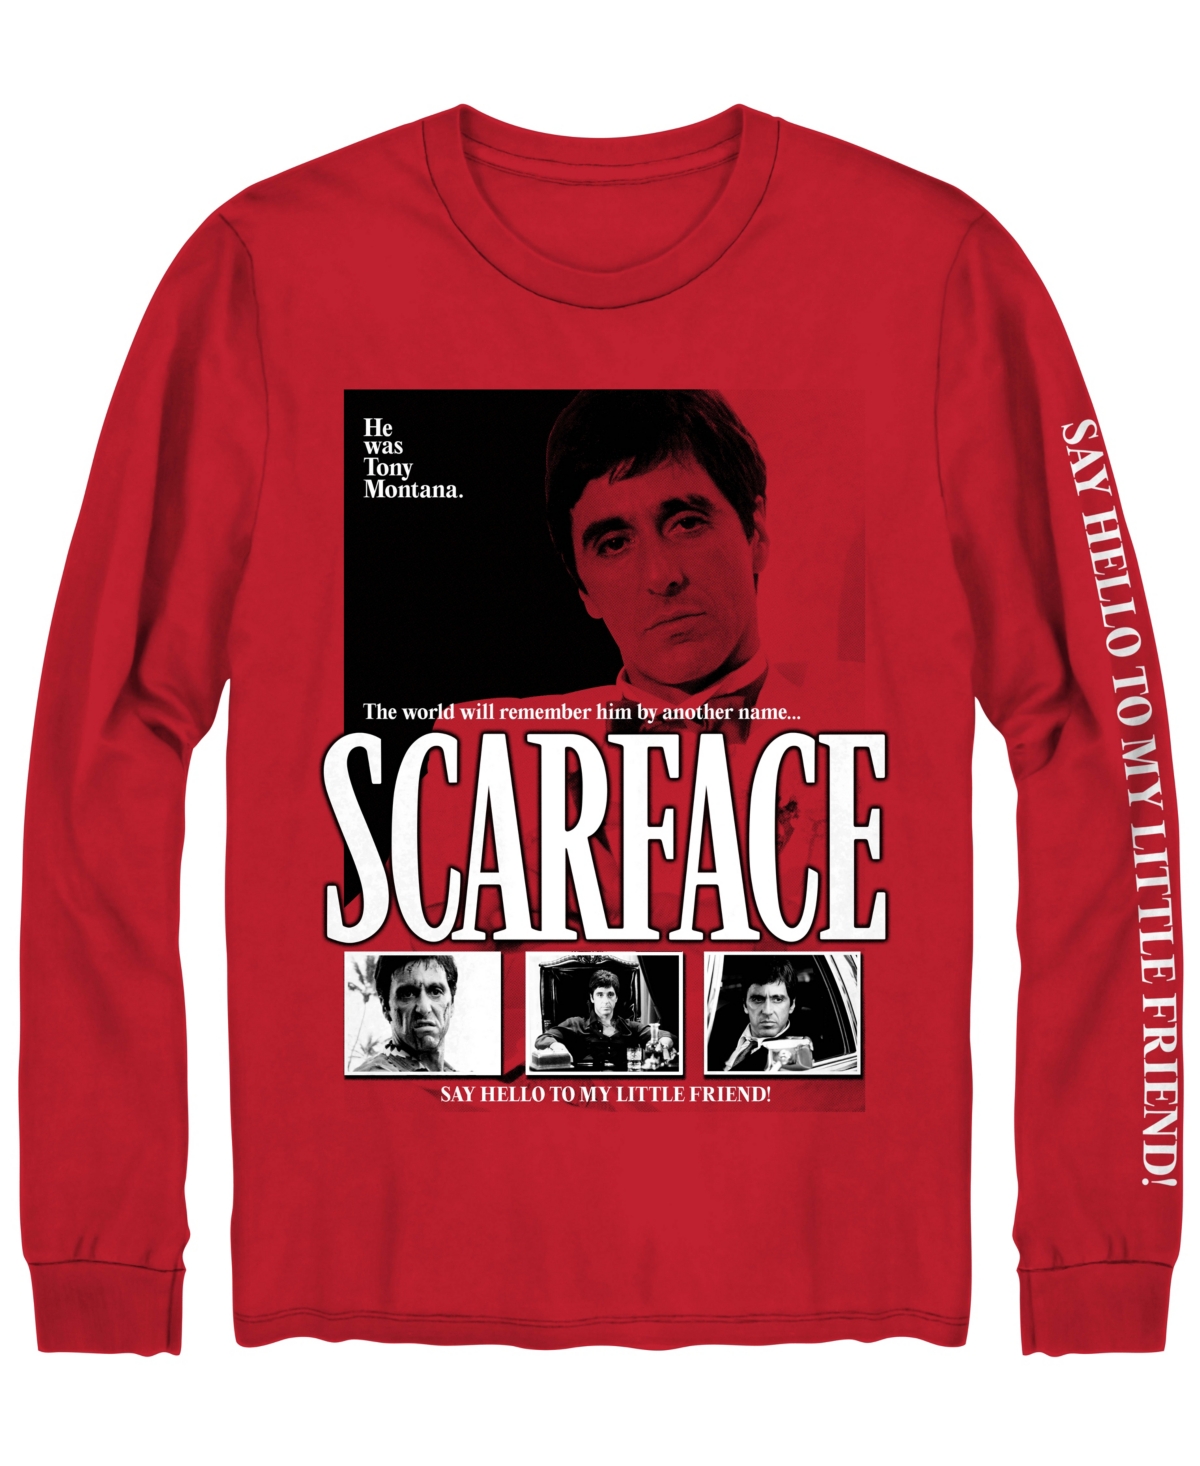 Men's Scarface Long Sleeve T-shirt - Red